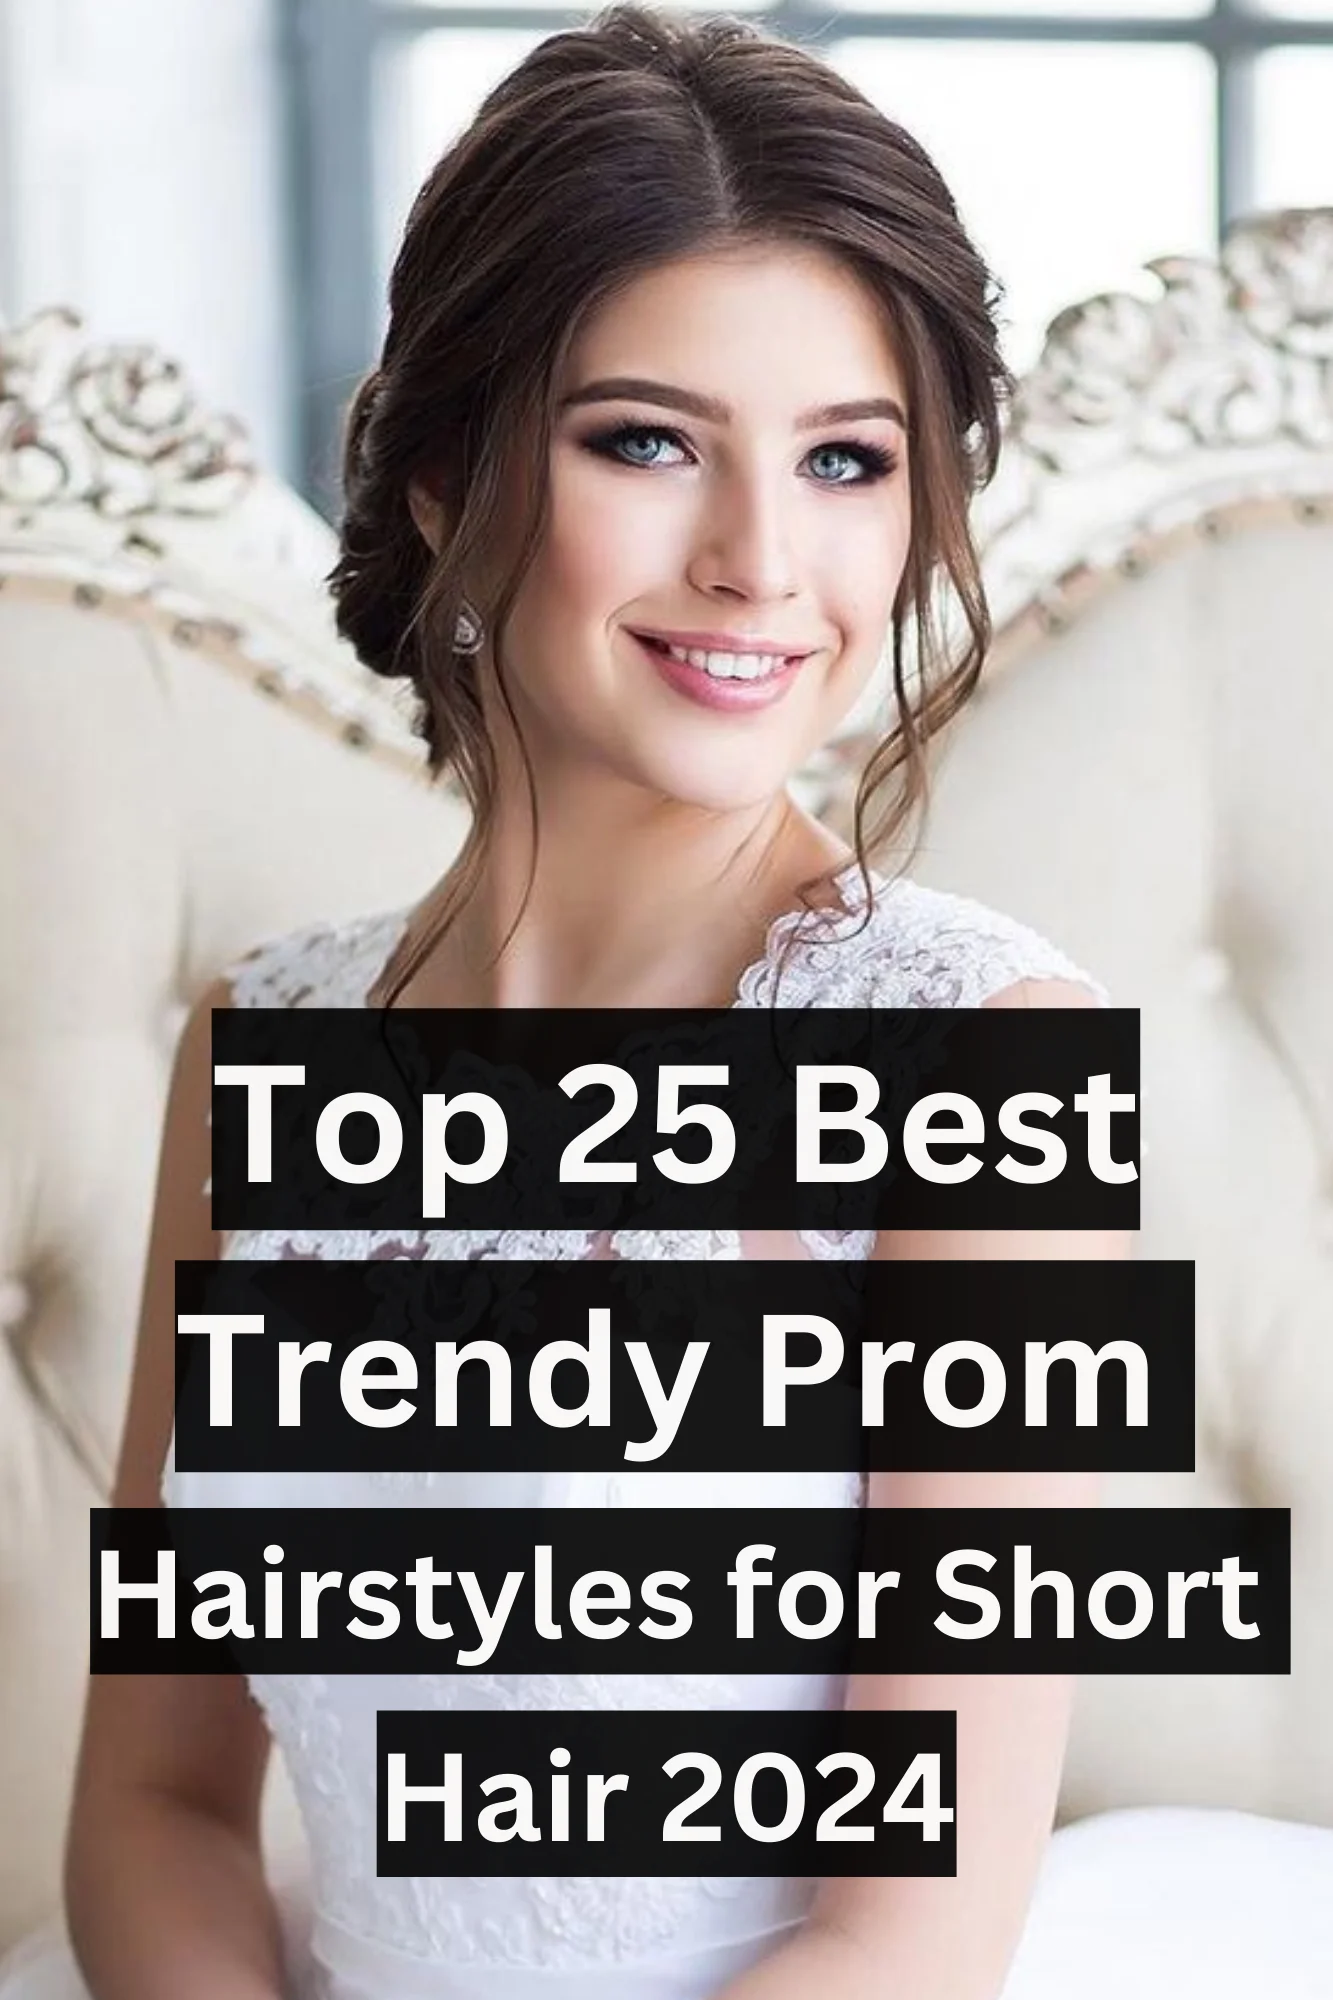 Prom Hairstyles for Short Hair 2024